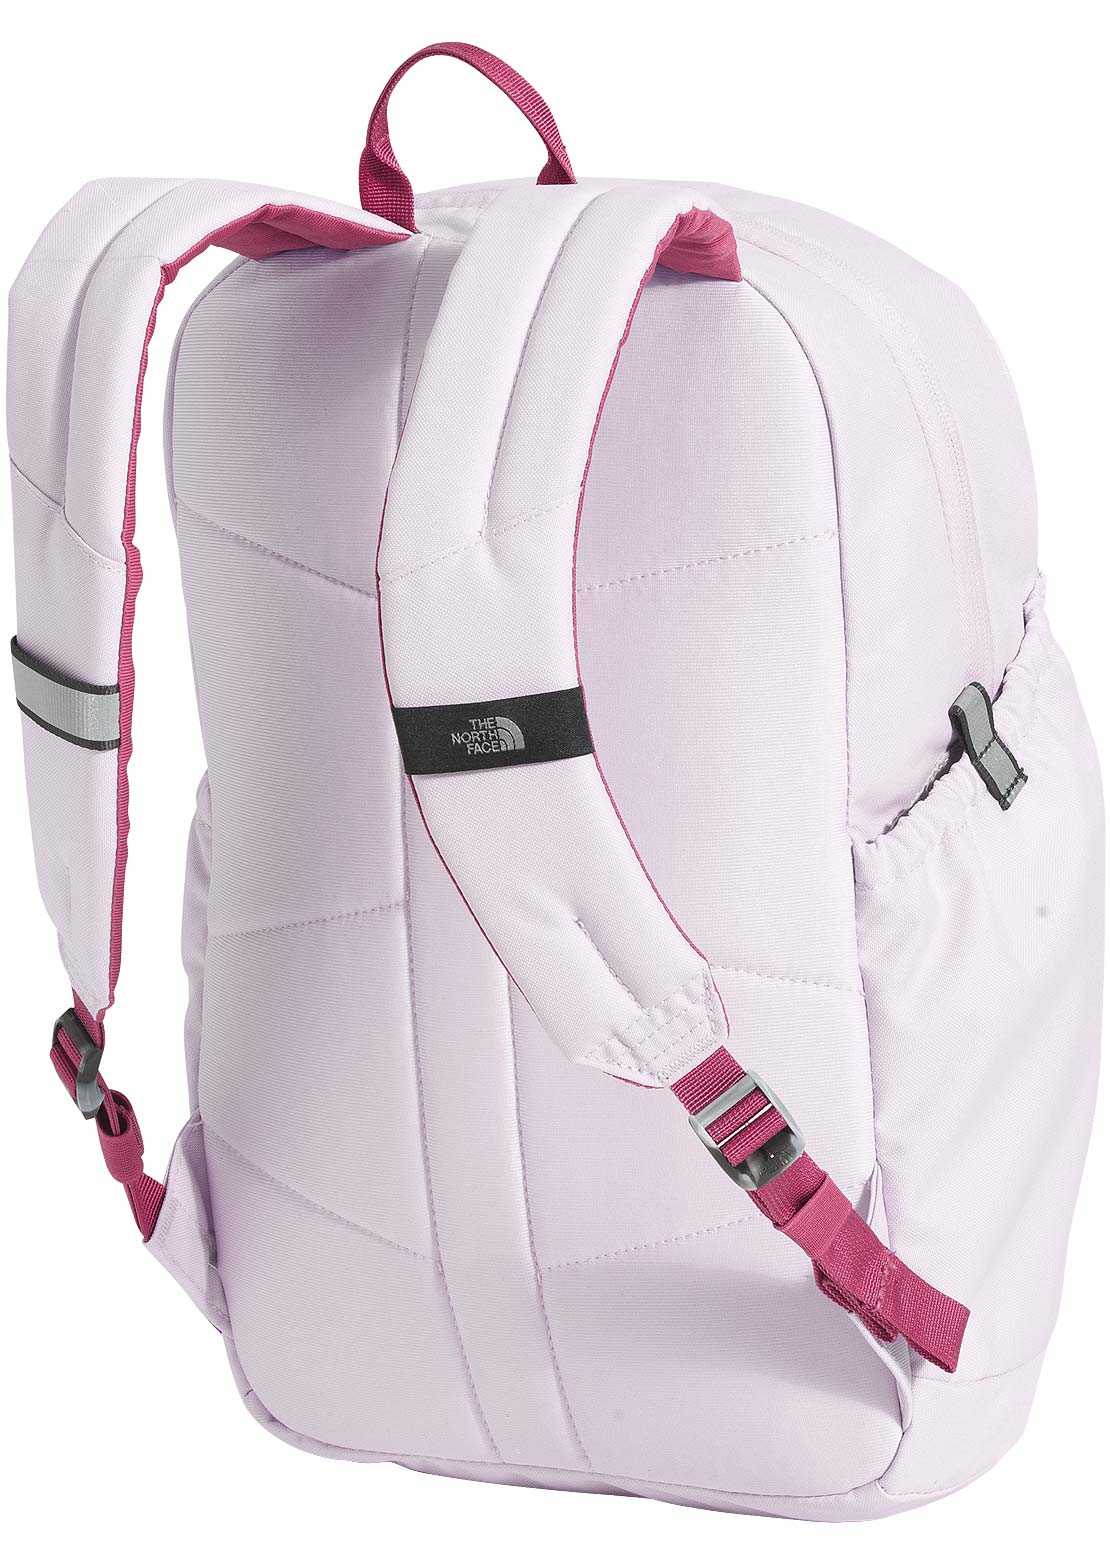 The North Face Junior Mini Recon Backpack Lavender Fog/Red Violet